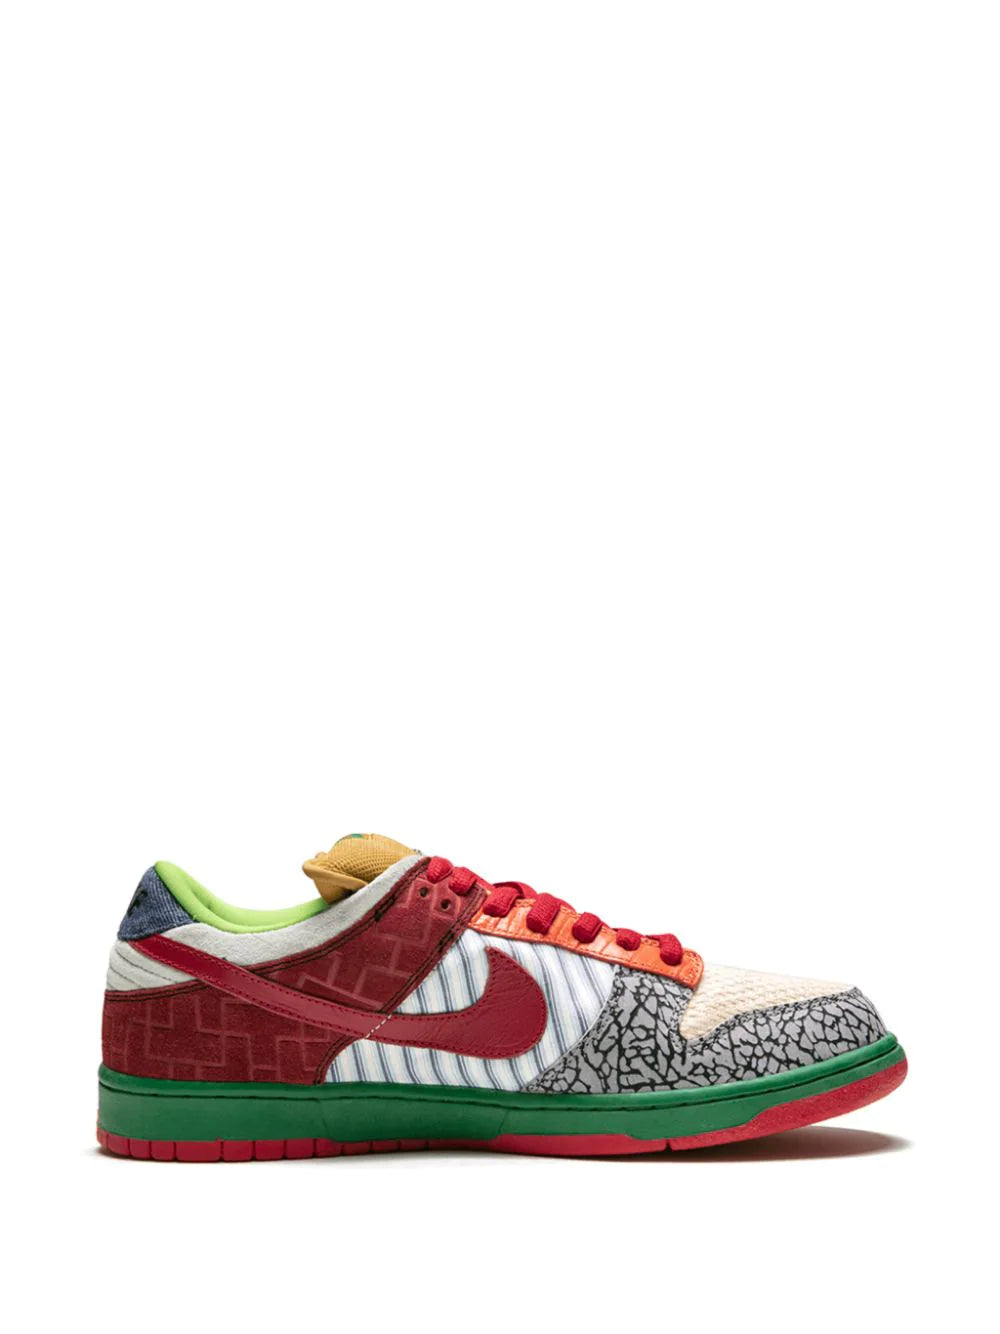 NIKE DUNK LOW - SB WHAT THE DUNK